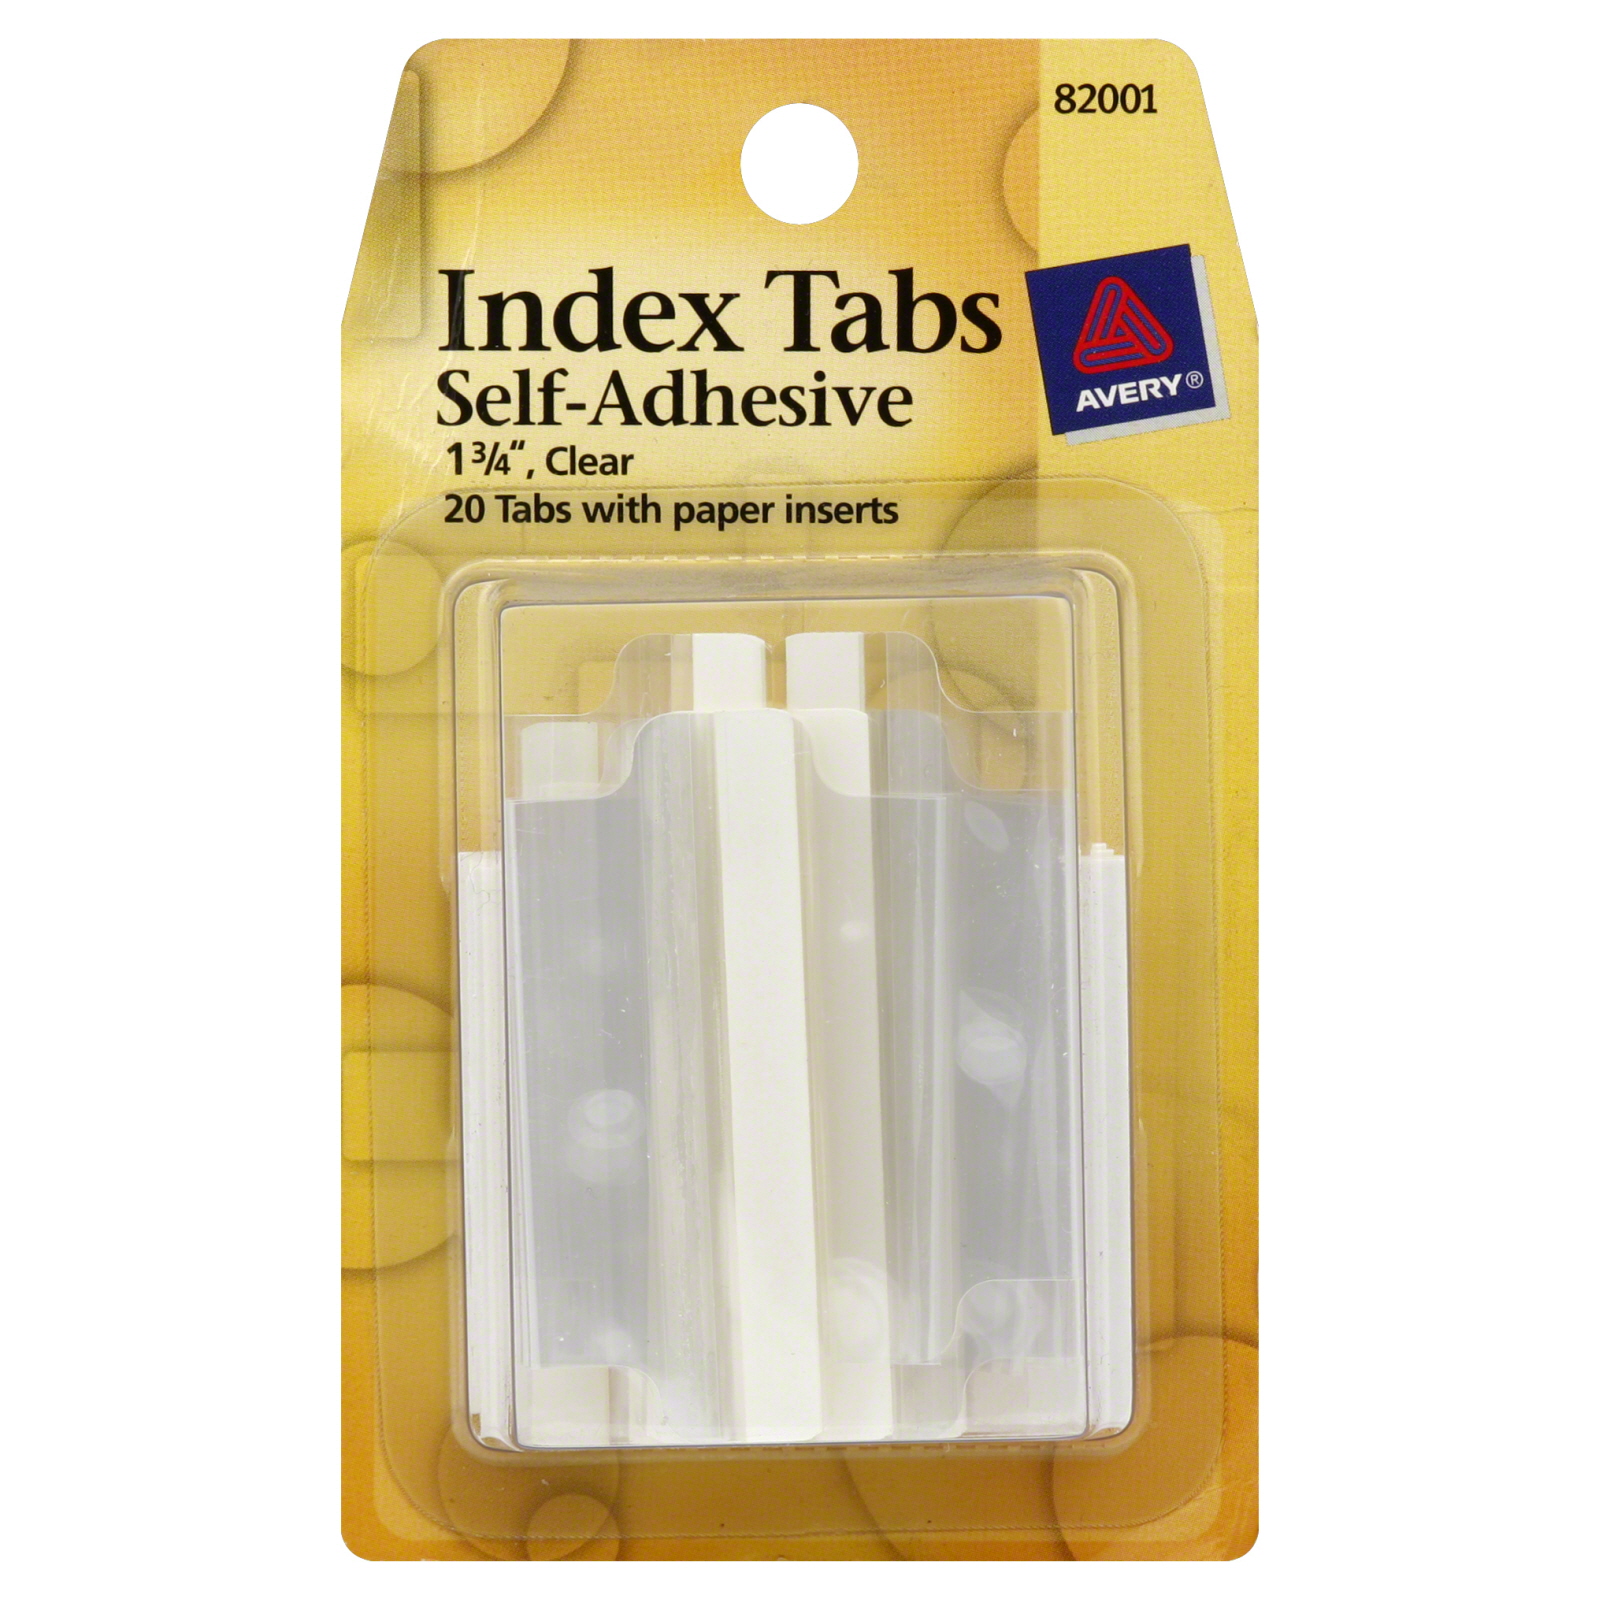 Avery 25006811 Peel and Stick Index Tabs, Clear, 20 tabs